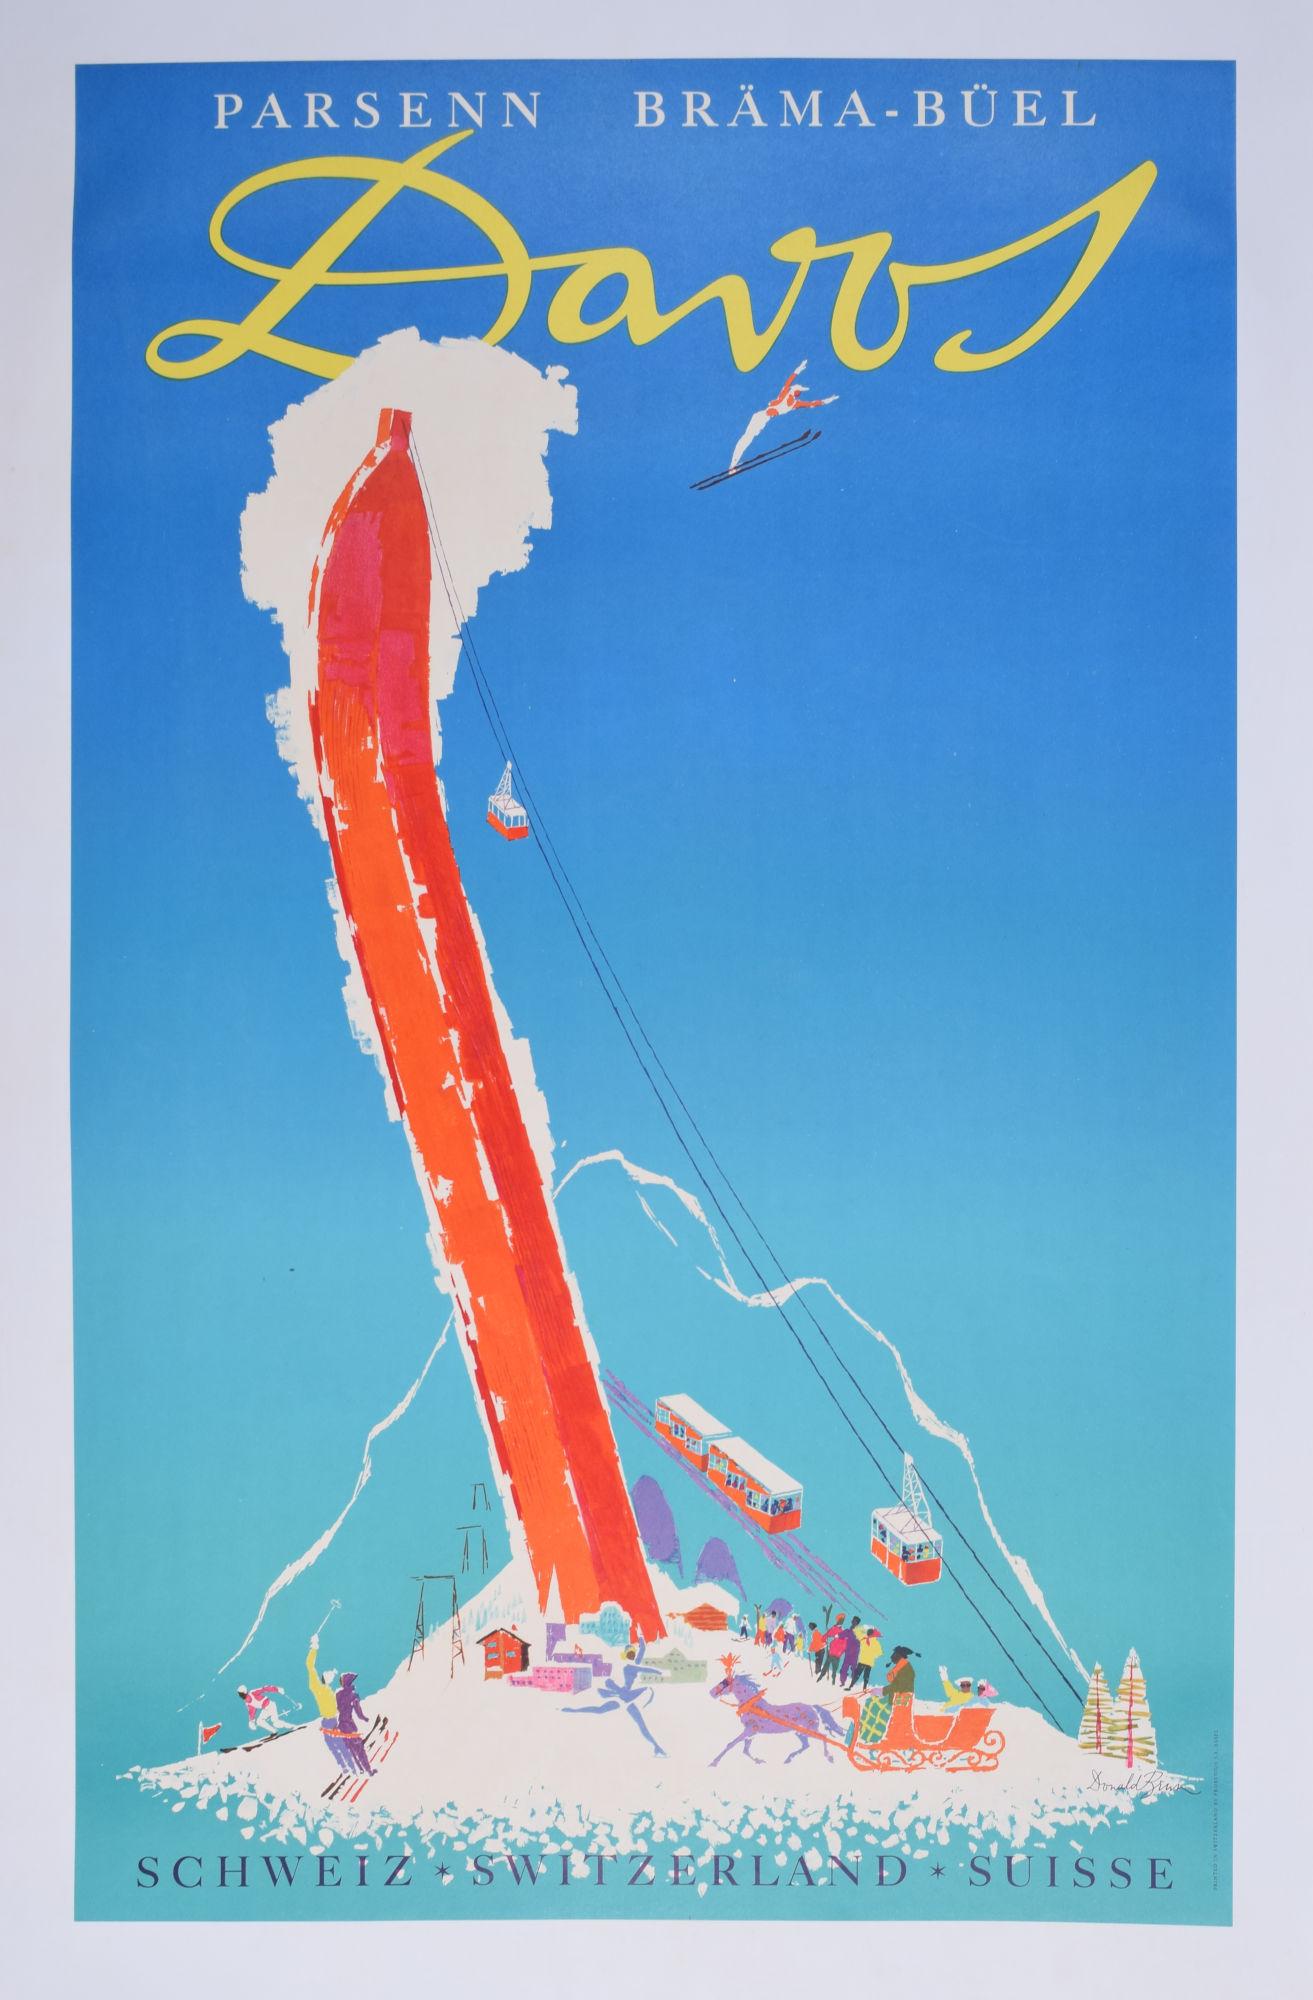 To see our other original vintage travel posters, many of which are from Switzerland, scroll down to "More from this Seller" and below it click on "See all from this Seller" - or send us a message if you cannot find the poster you want.

Donald Brun